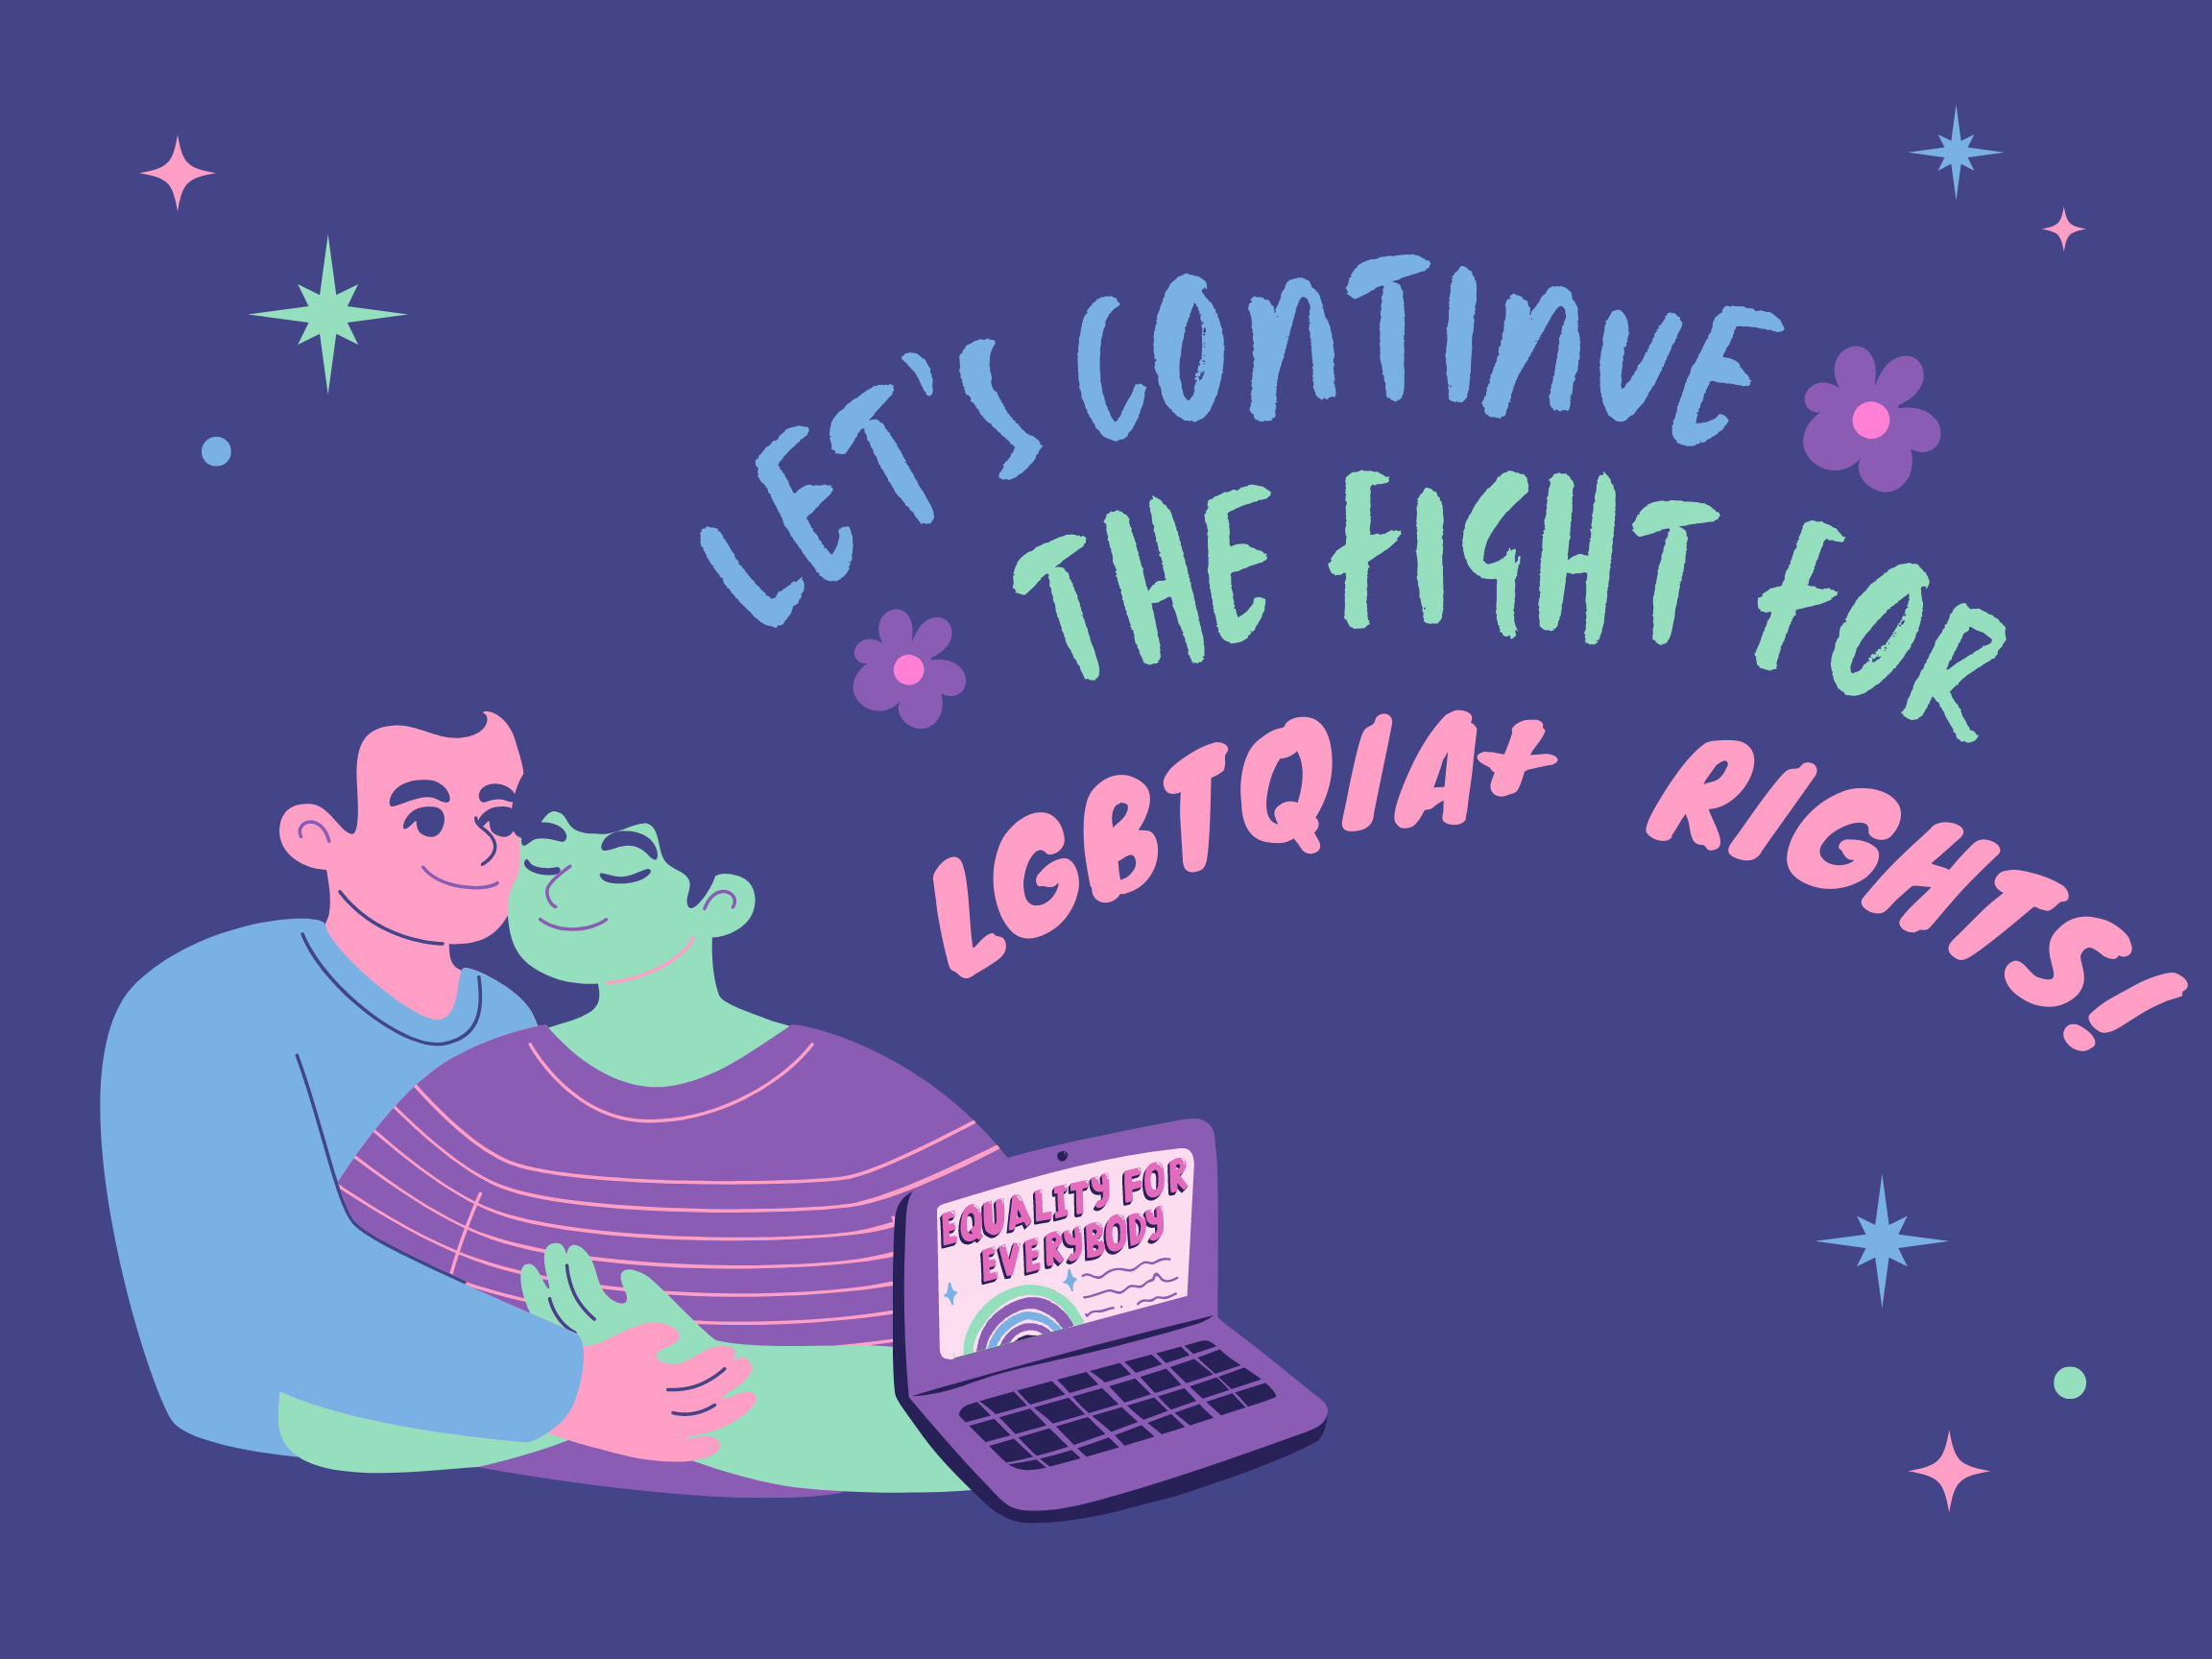 Let's continue the fight for LGBTQIA+ rights